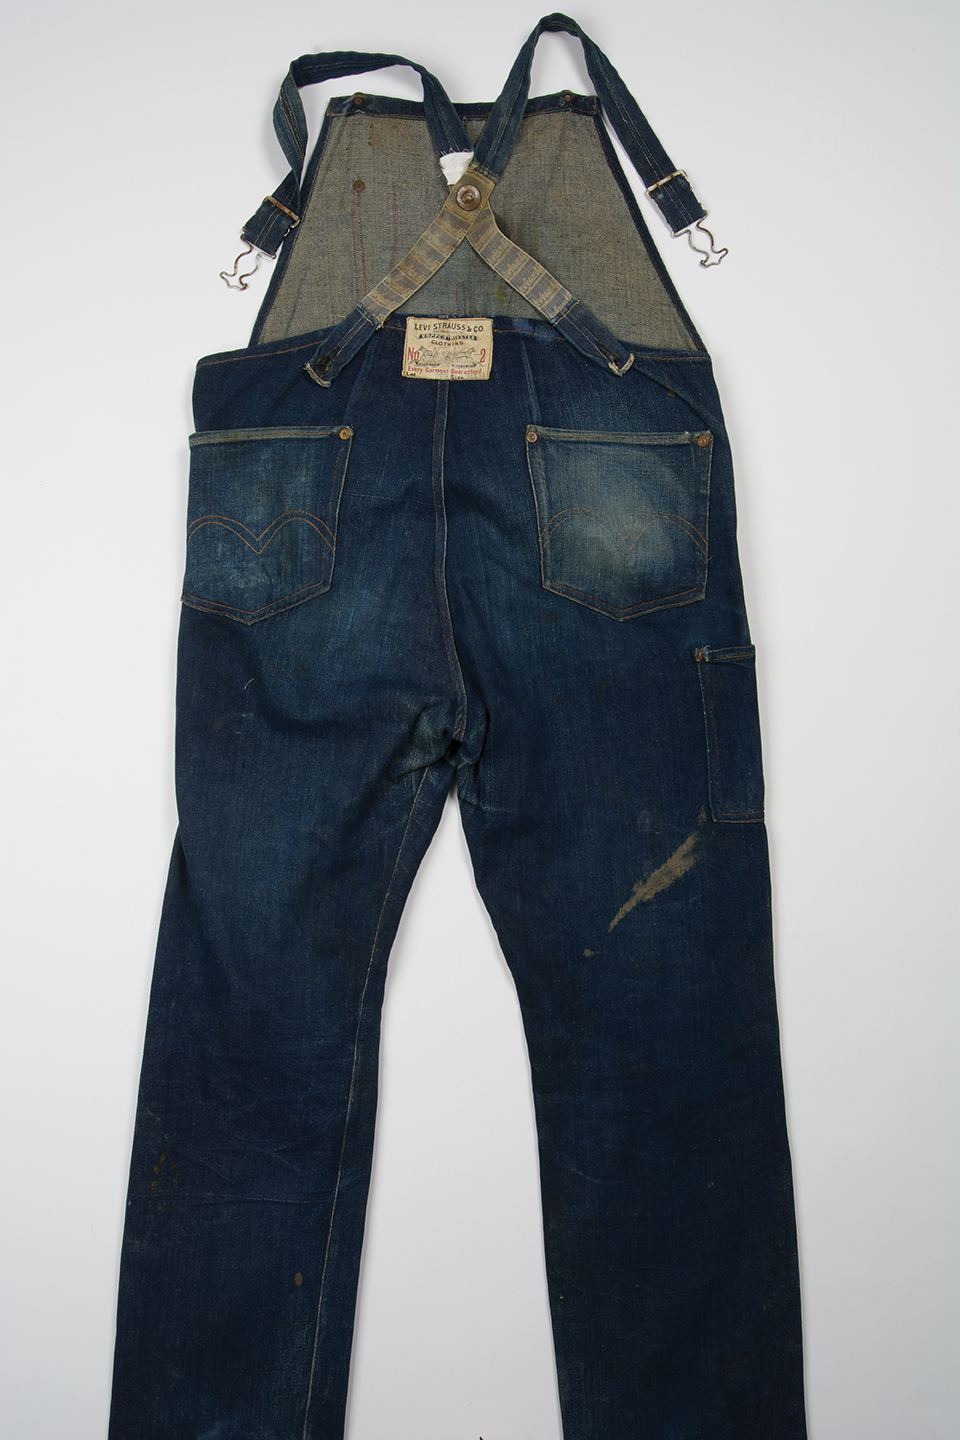 Joanne Hill Buzz: Levi Strauss First Pair Jeans 1850